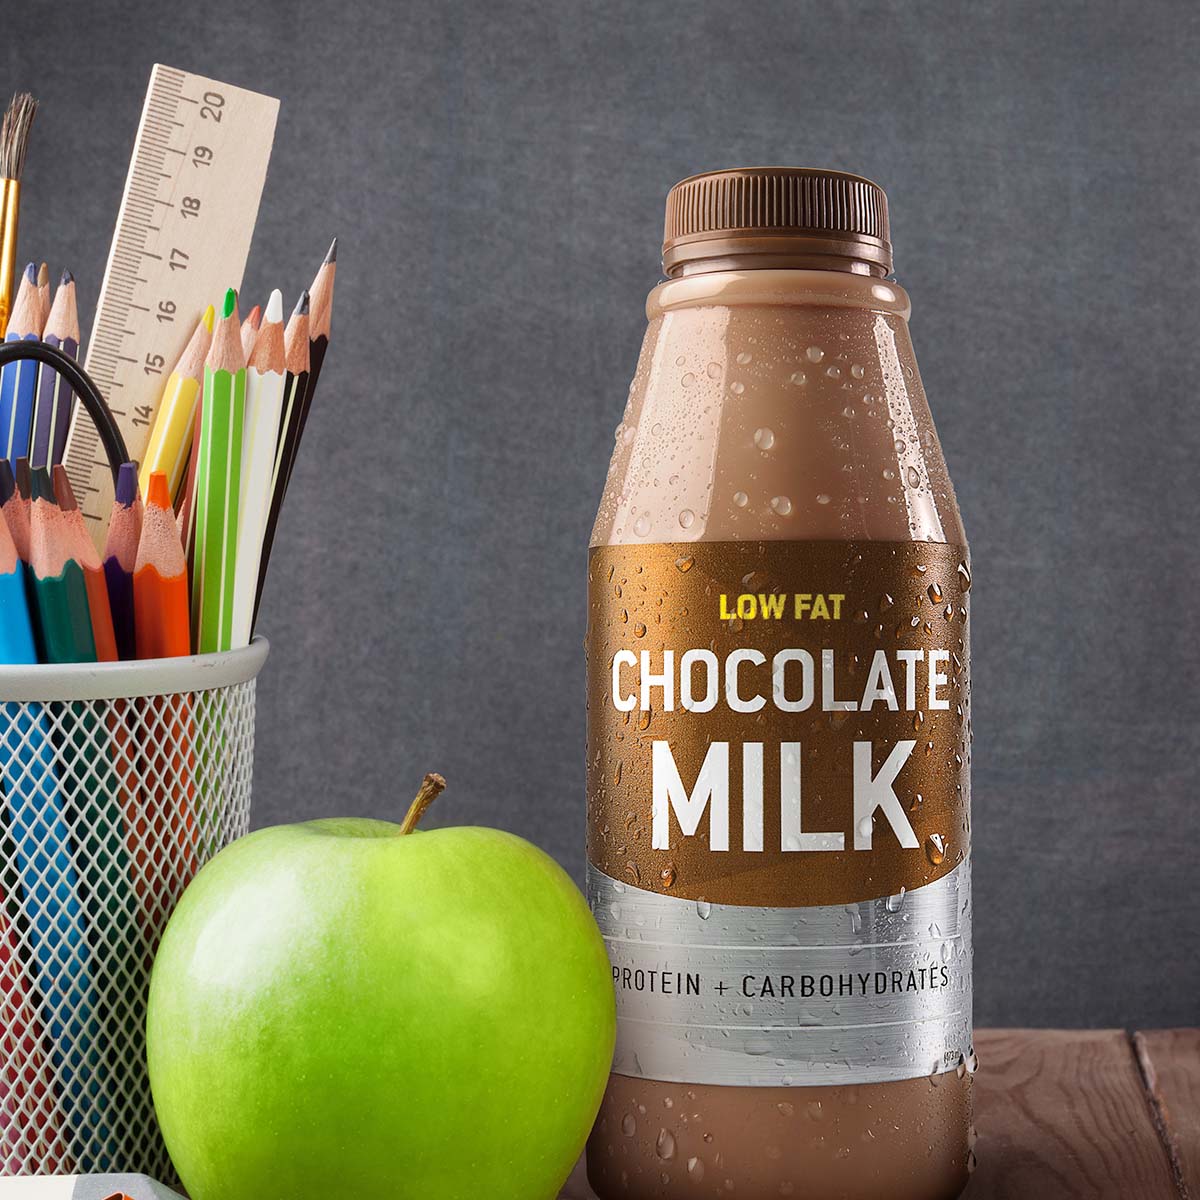 chocolate milk bottle next to an apple and school supplies